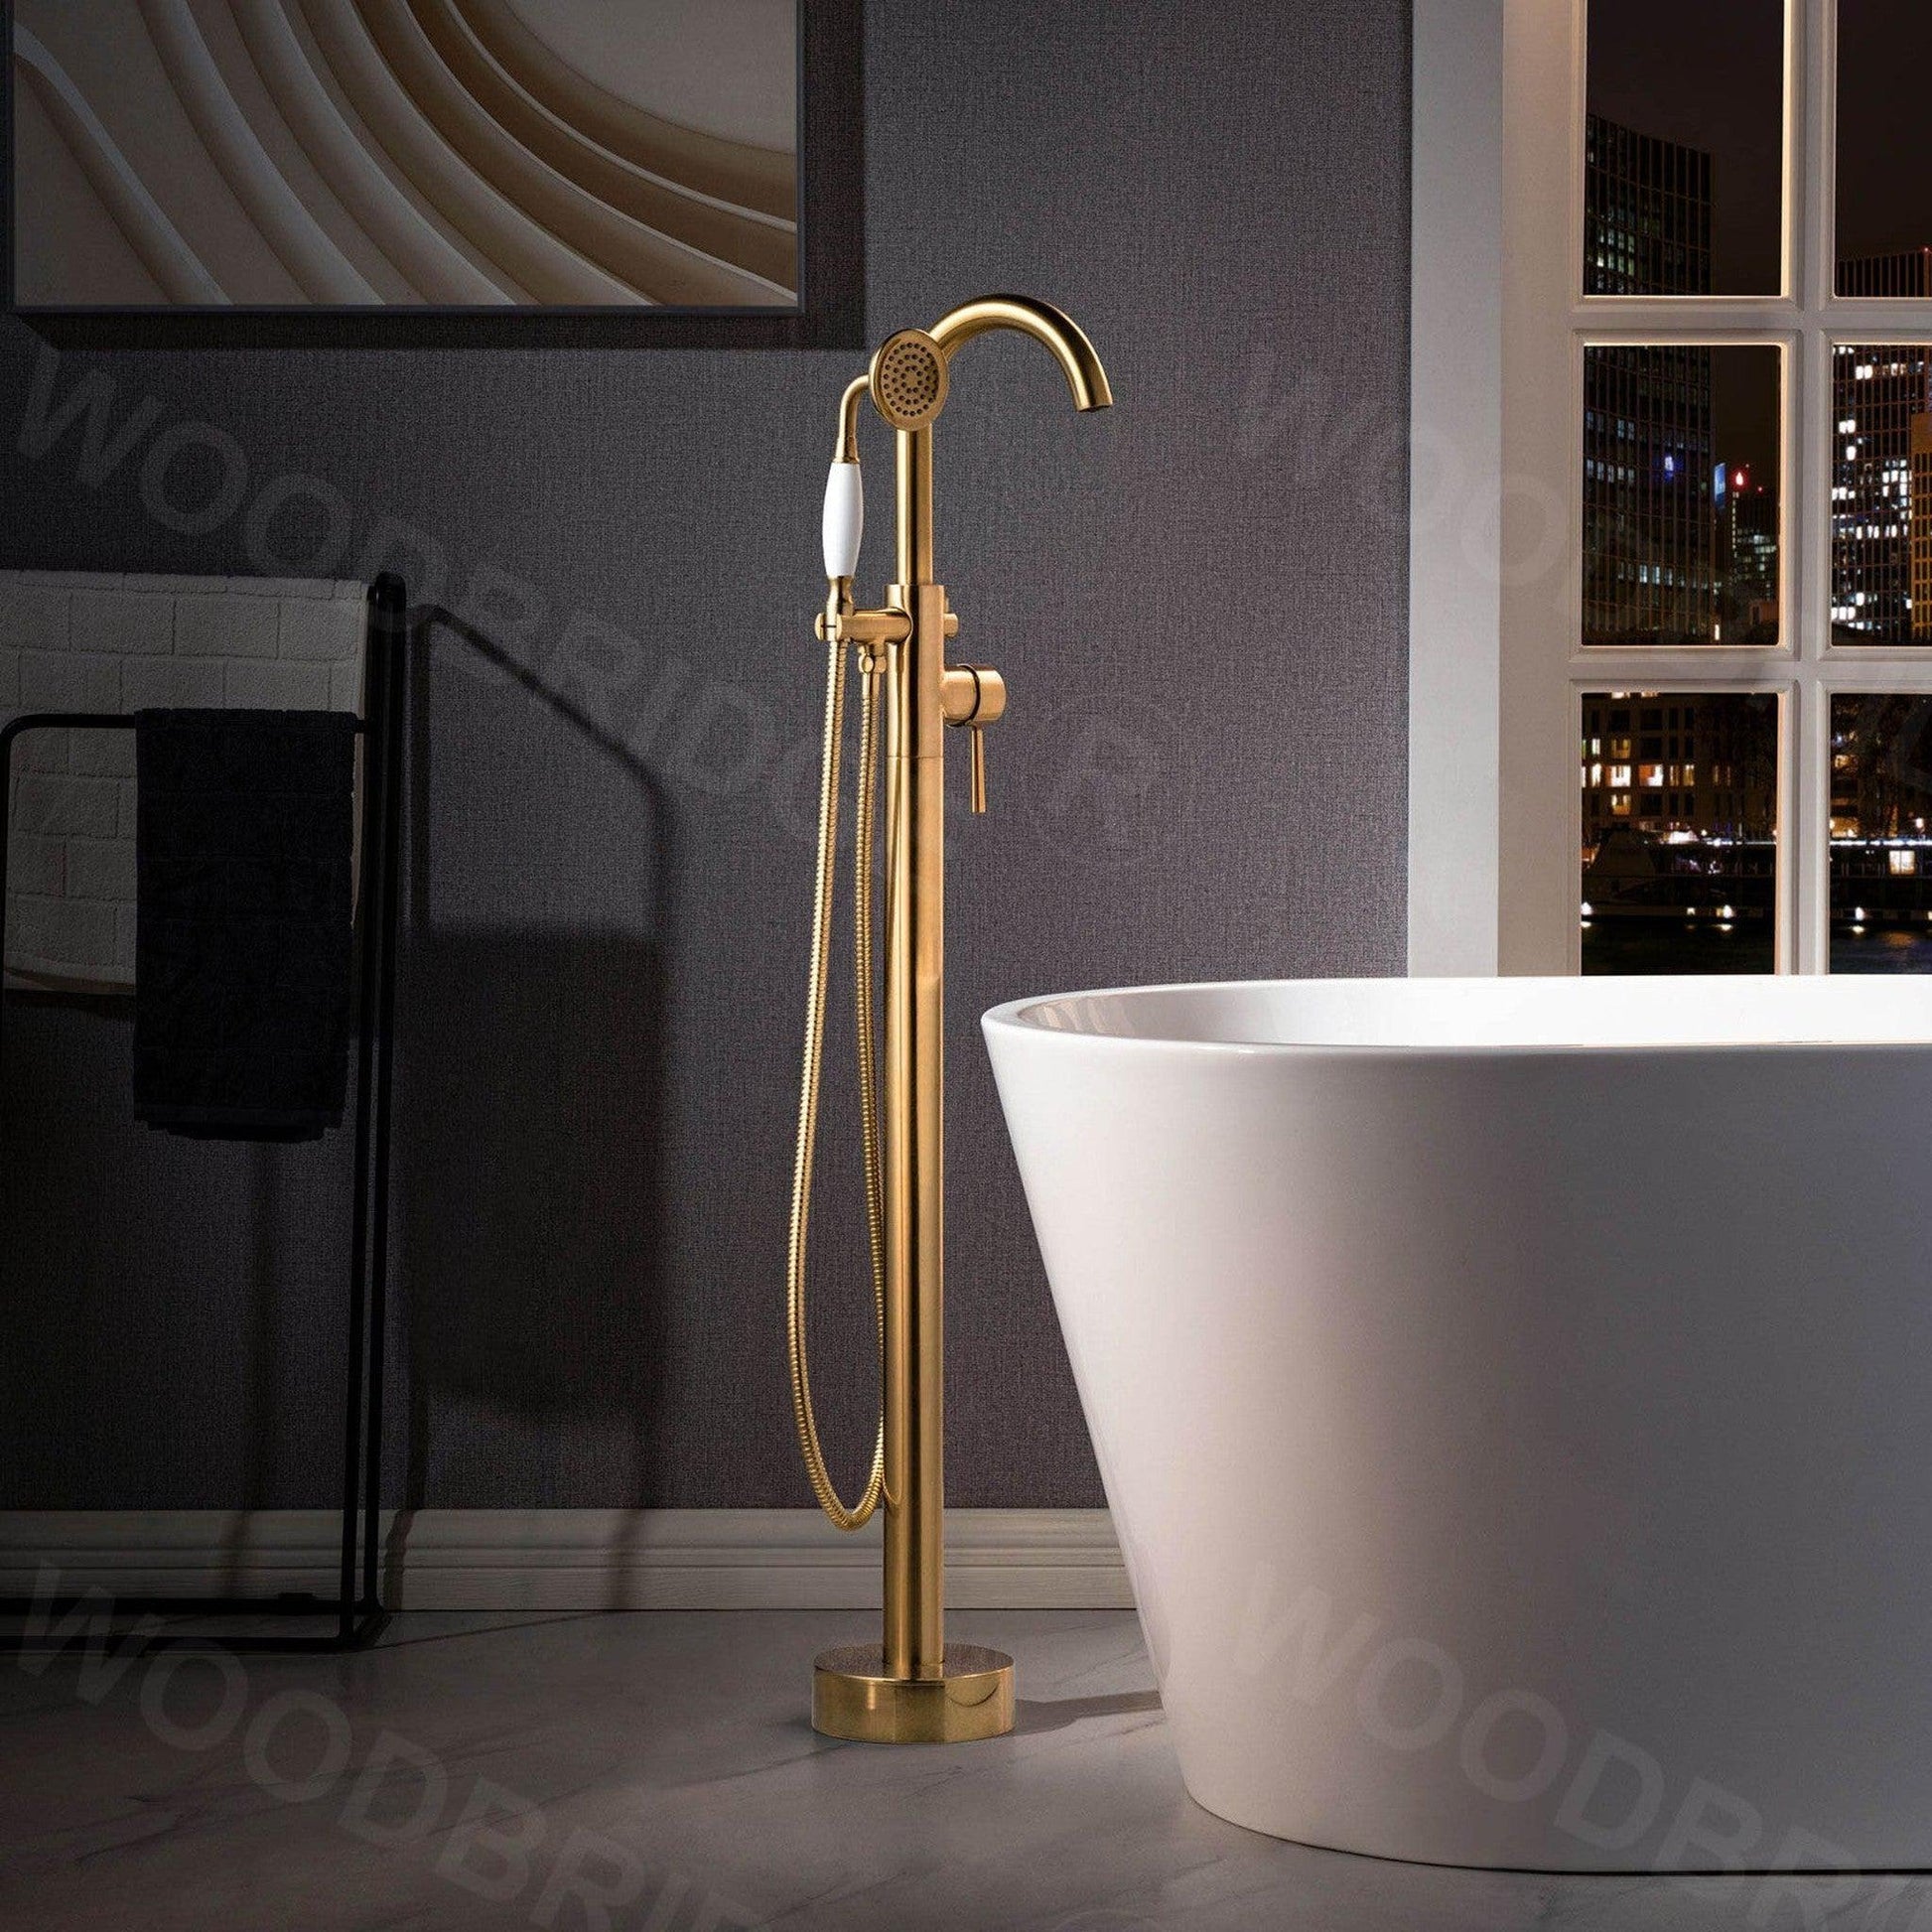 WoodBridge B0064 59" White Acrylic Freestanding Contemporary Soaking Bathtub With Brushed Gold Overflow, Drain, F0026BGVT Tub Filler and Caddy Tray